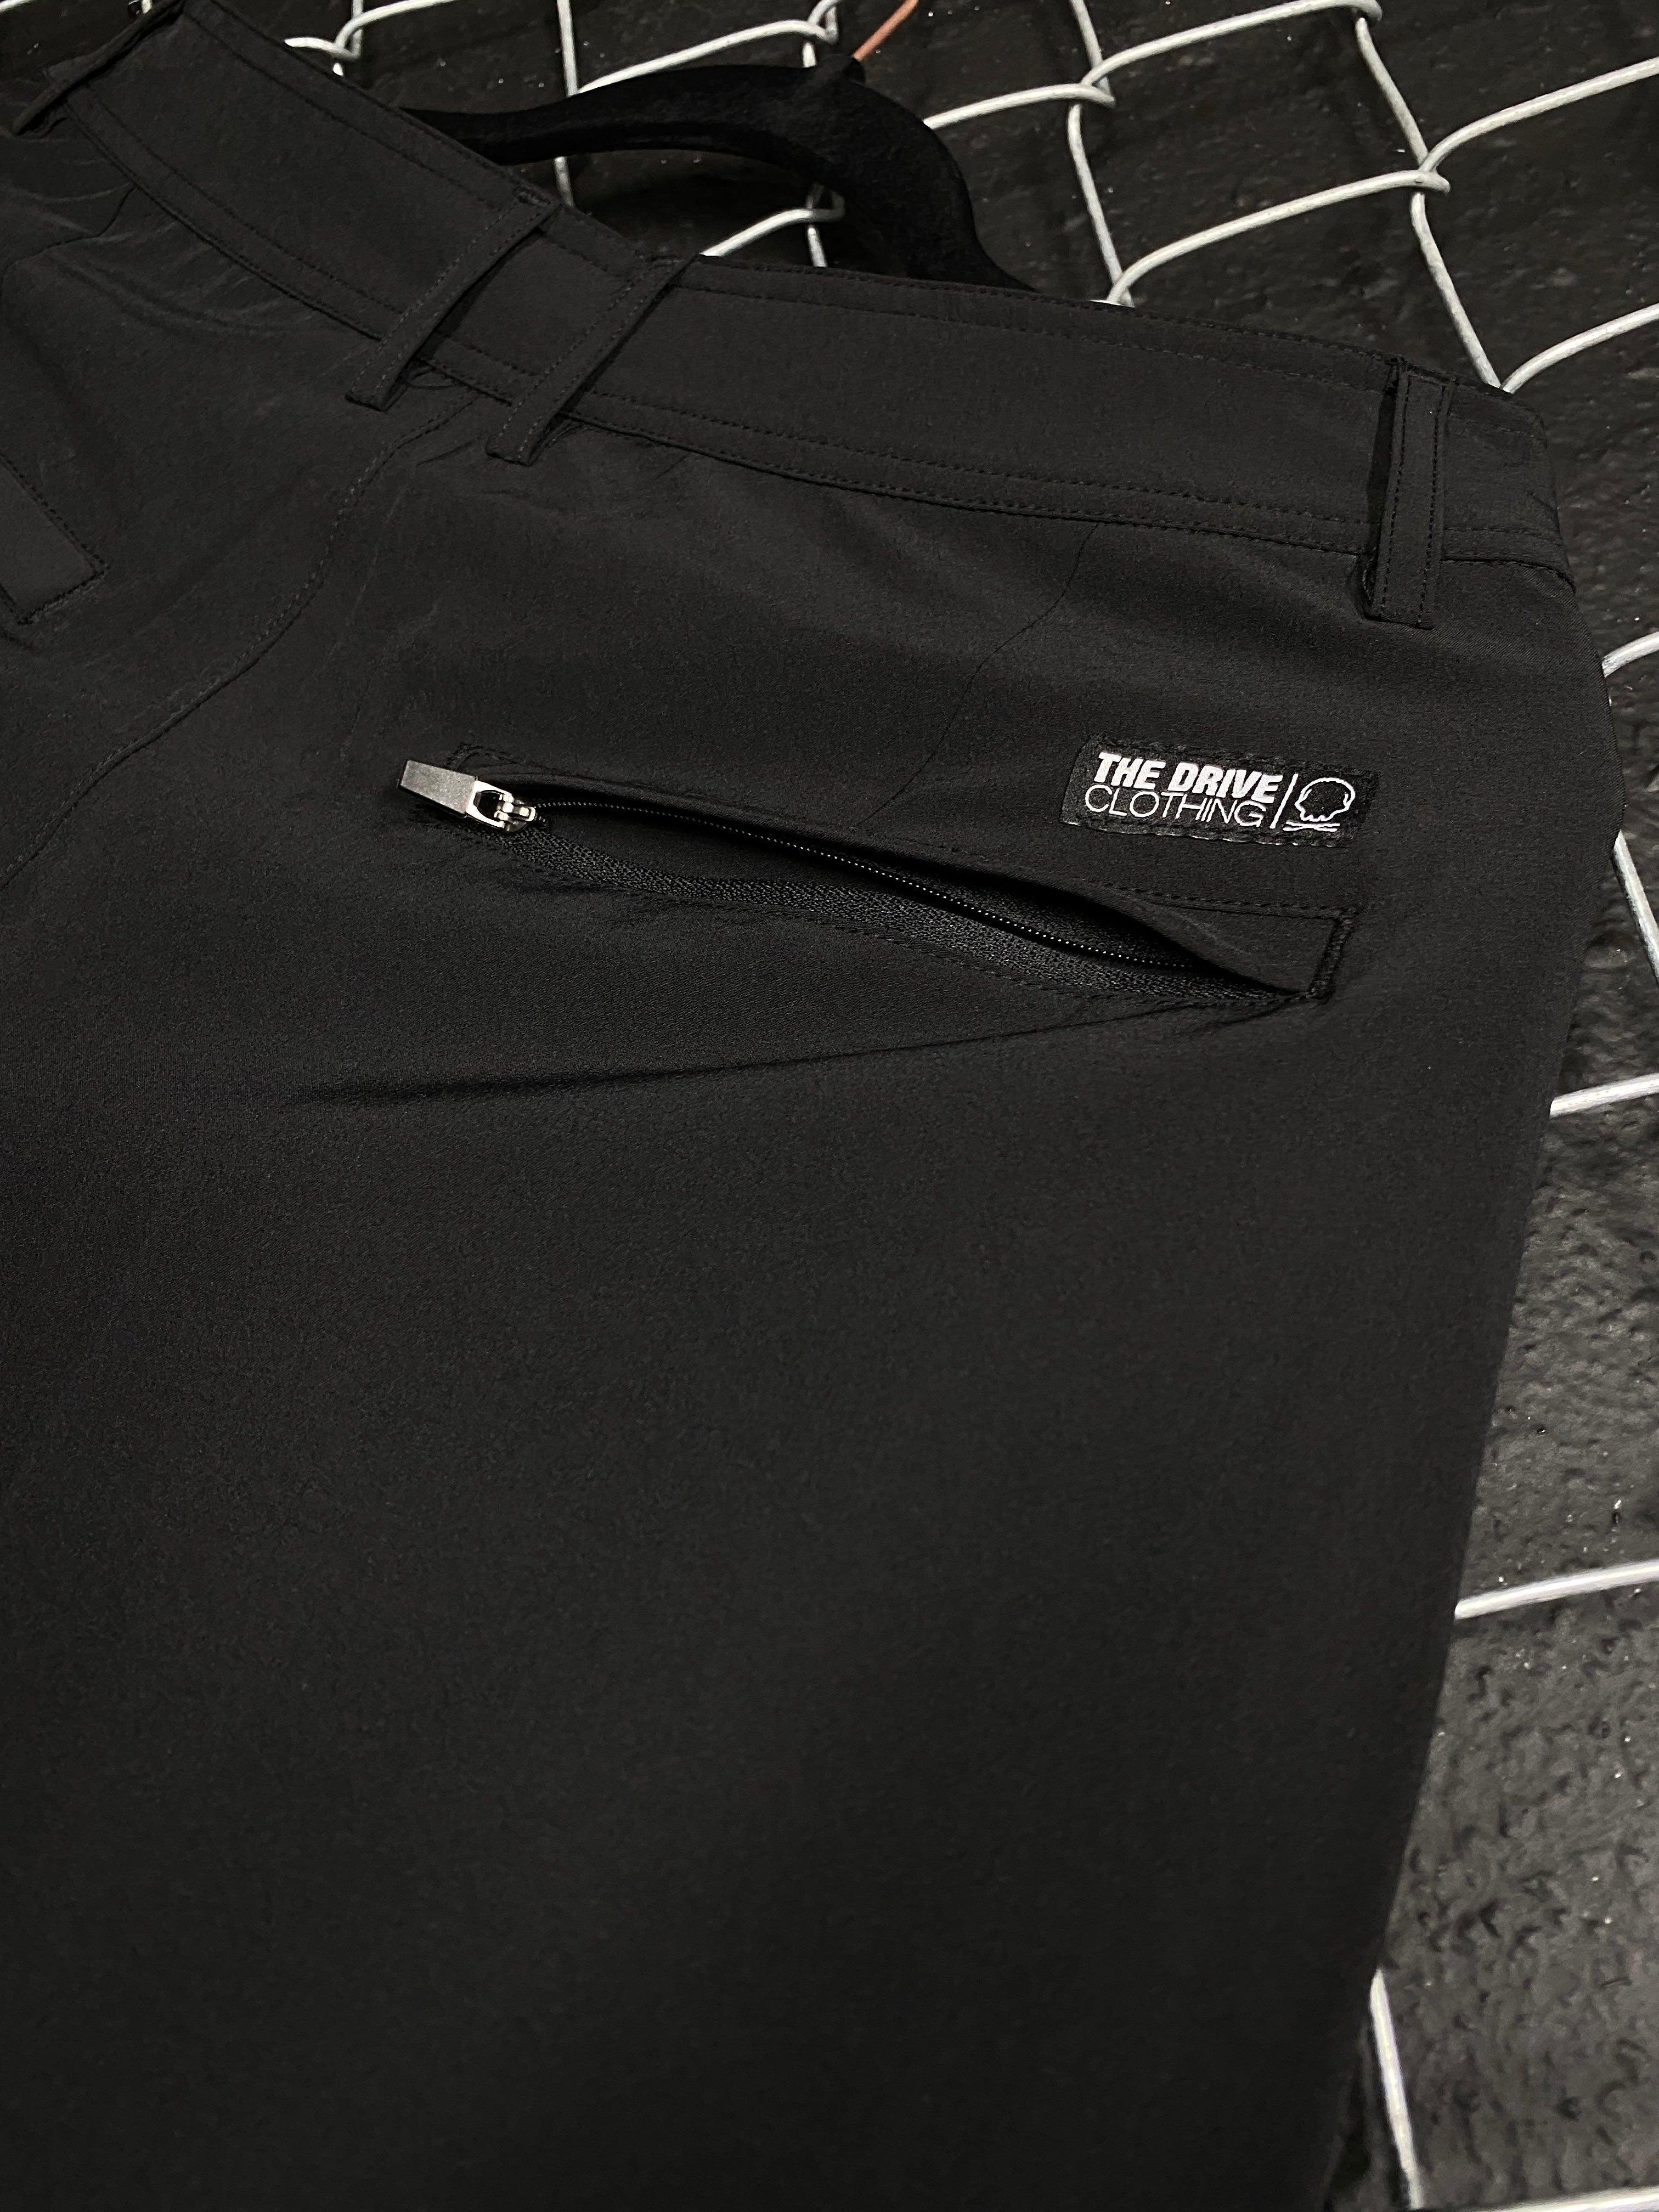 DRIVEN LIFESTYLE BLACK SHORTS – The Drive Clothing